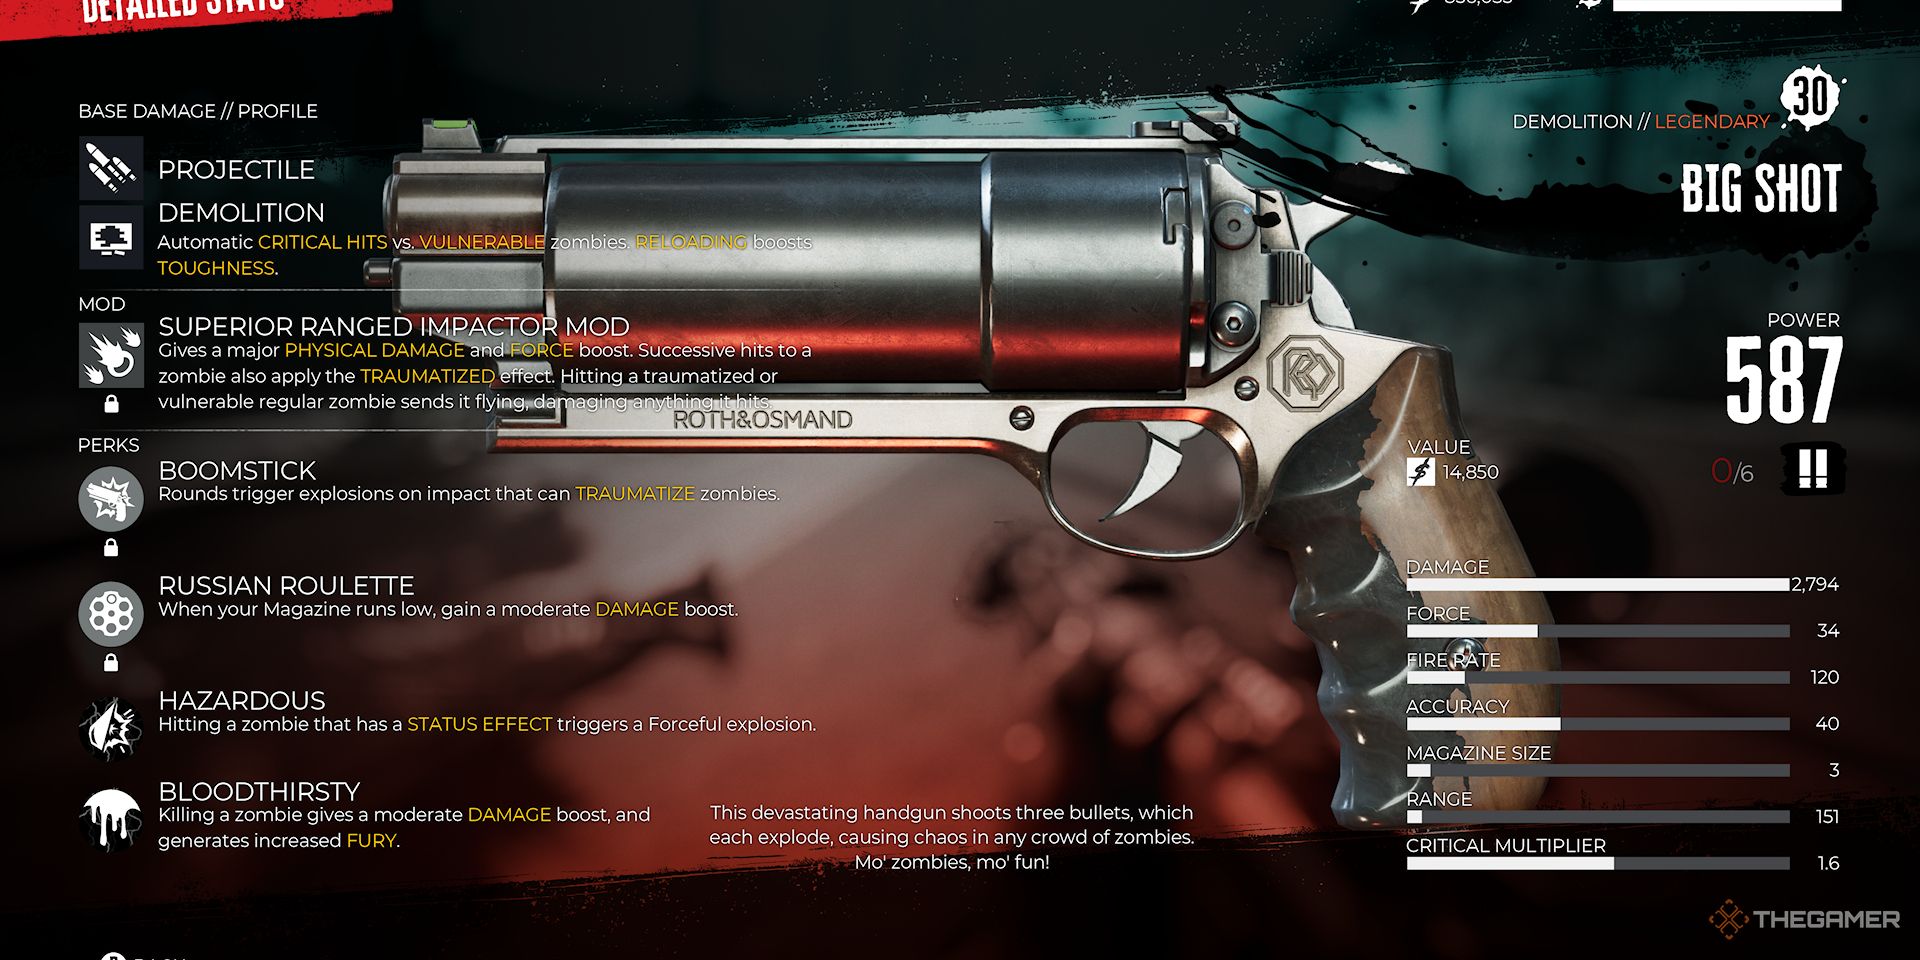 Image shows the legendary gun Big Shot and its stats in Dead Island 2